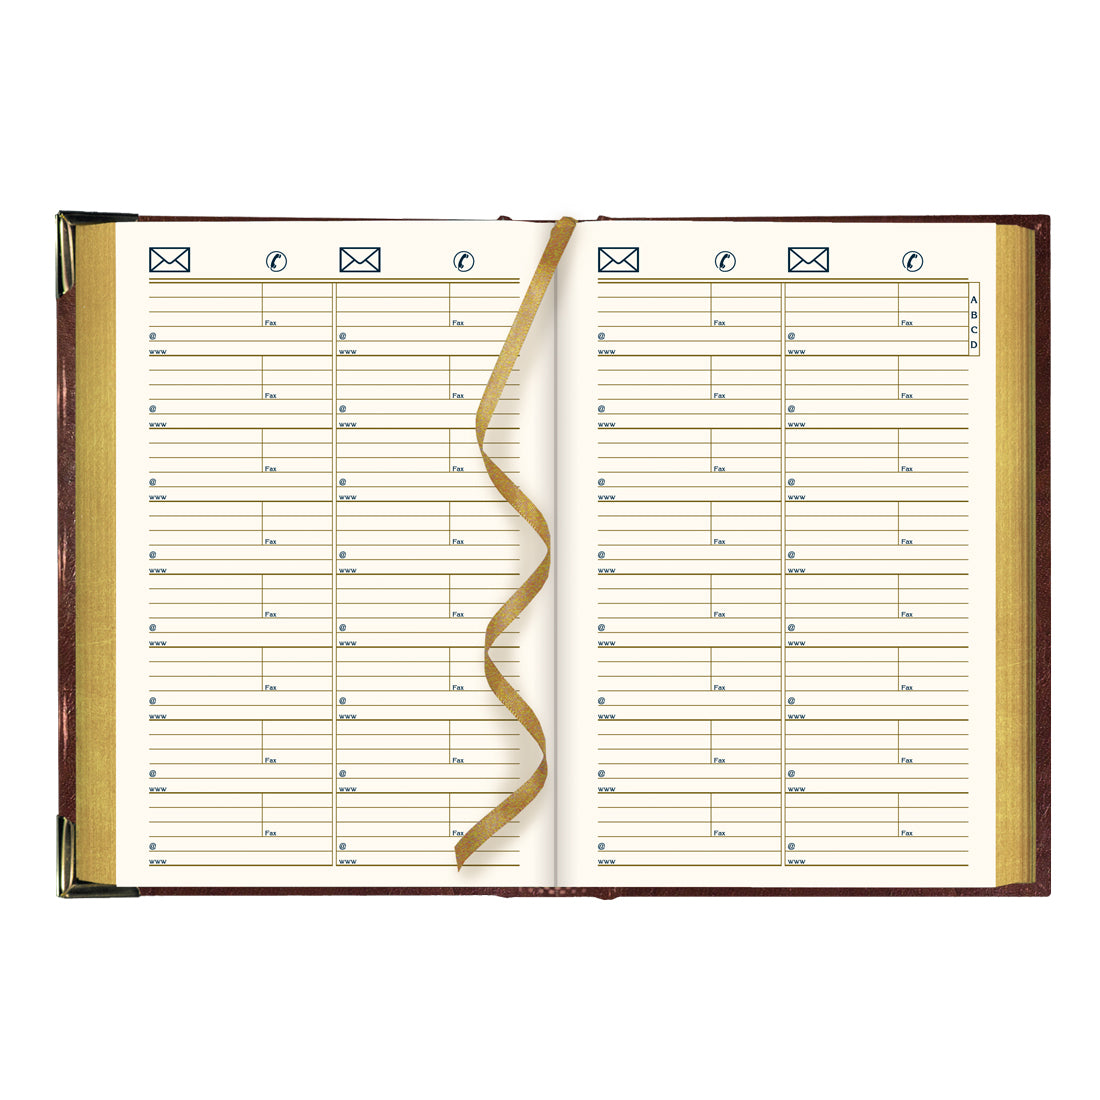 Executive Daily Planner 2024, Tan